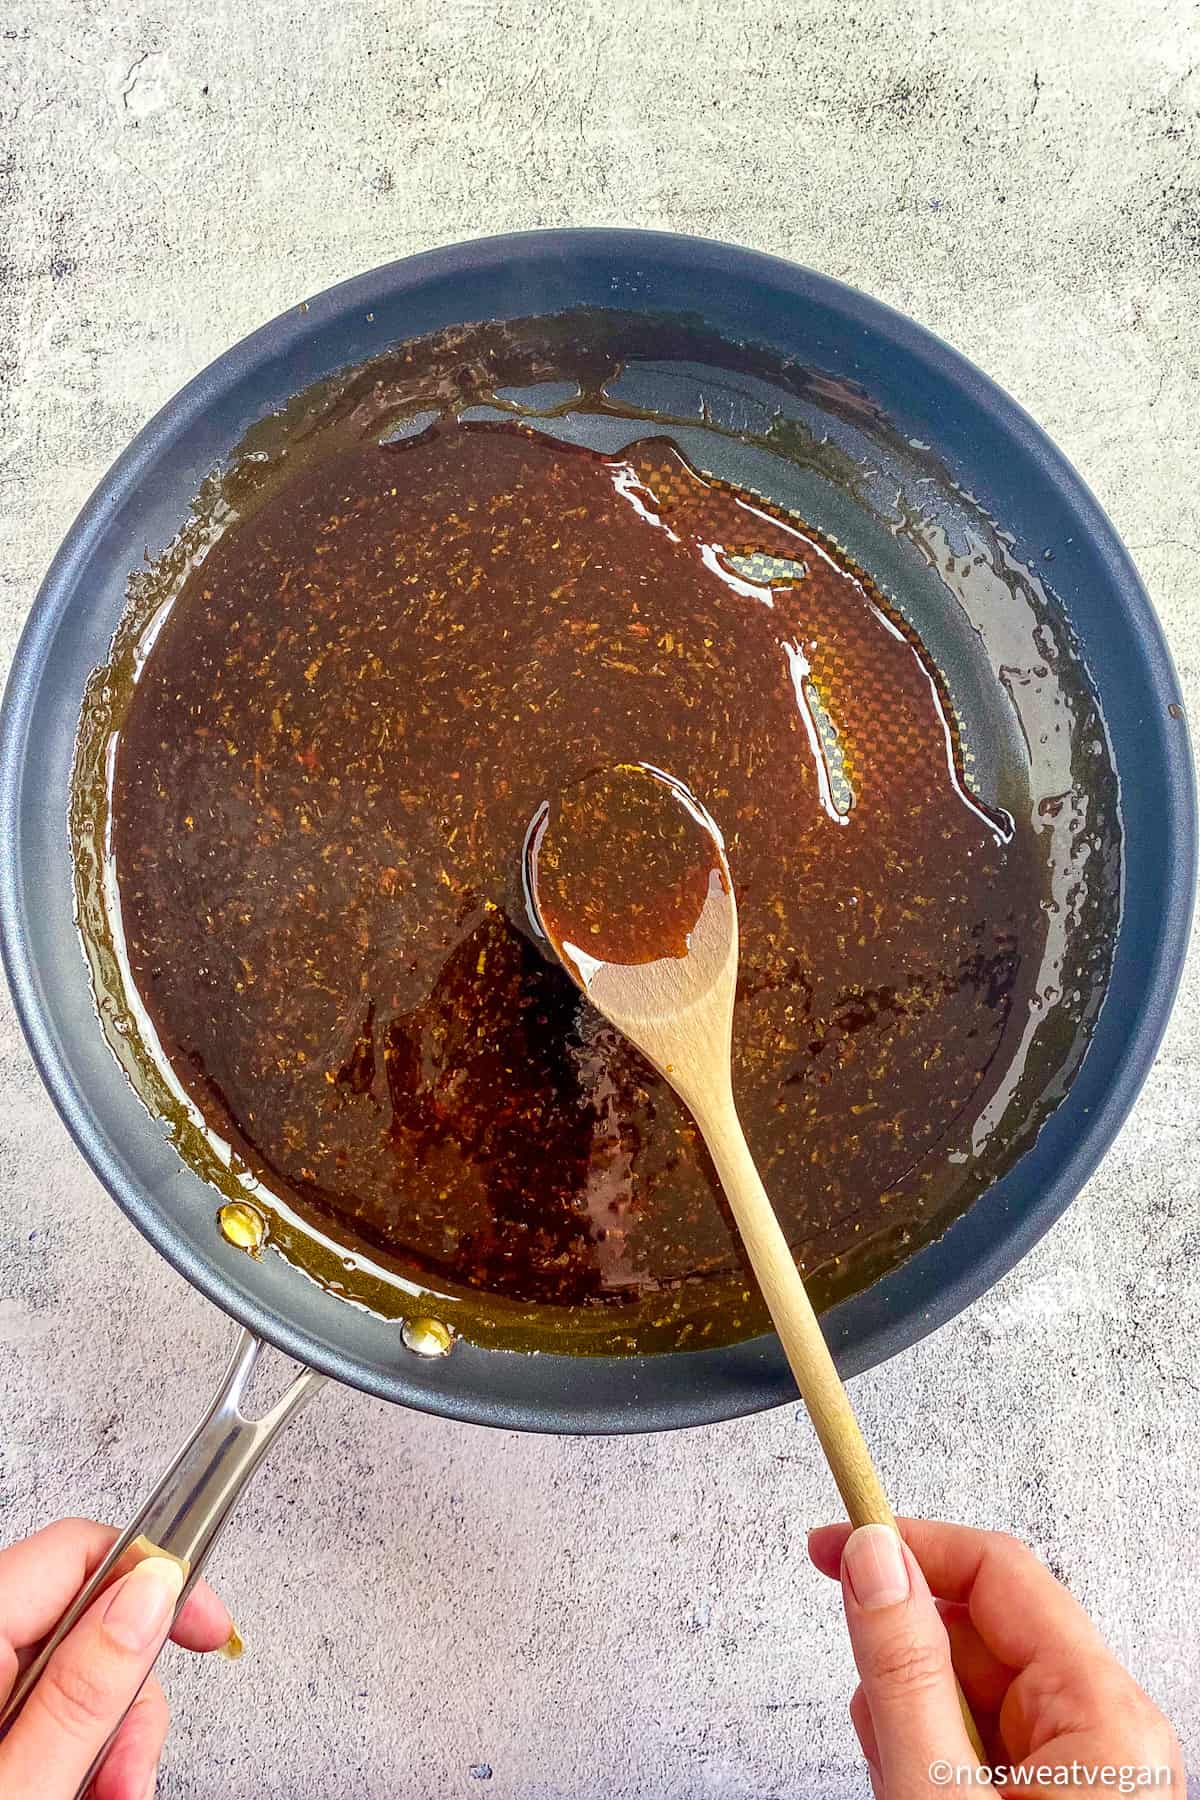 Teriyaki sauce in a skillet with a hand holding a wooden spoon.